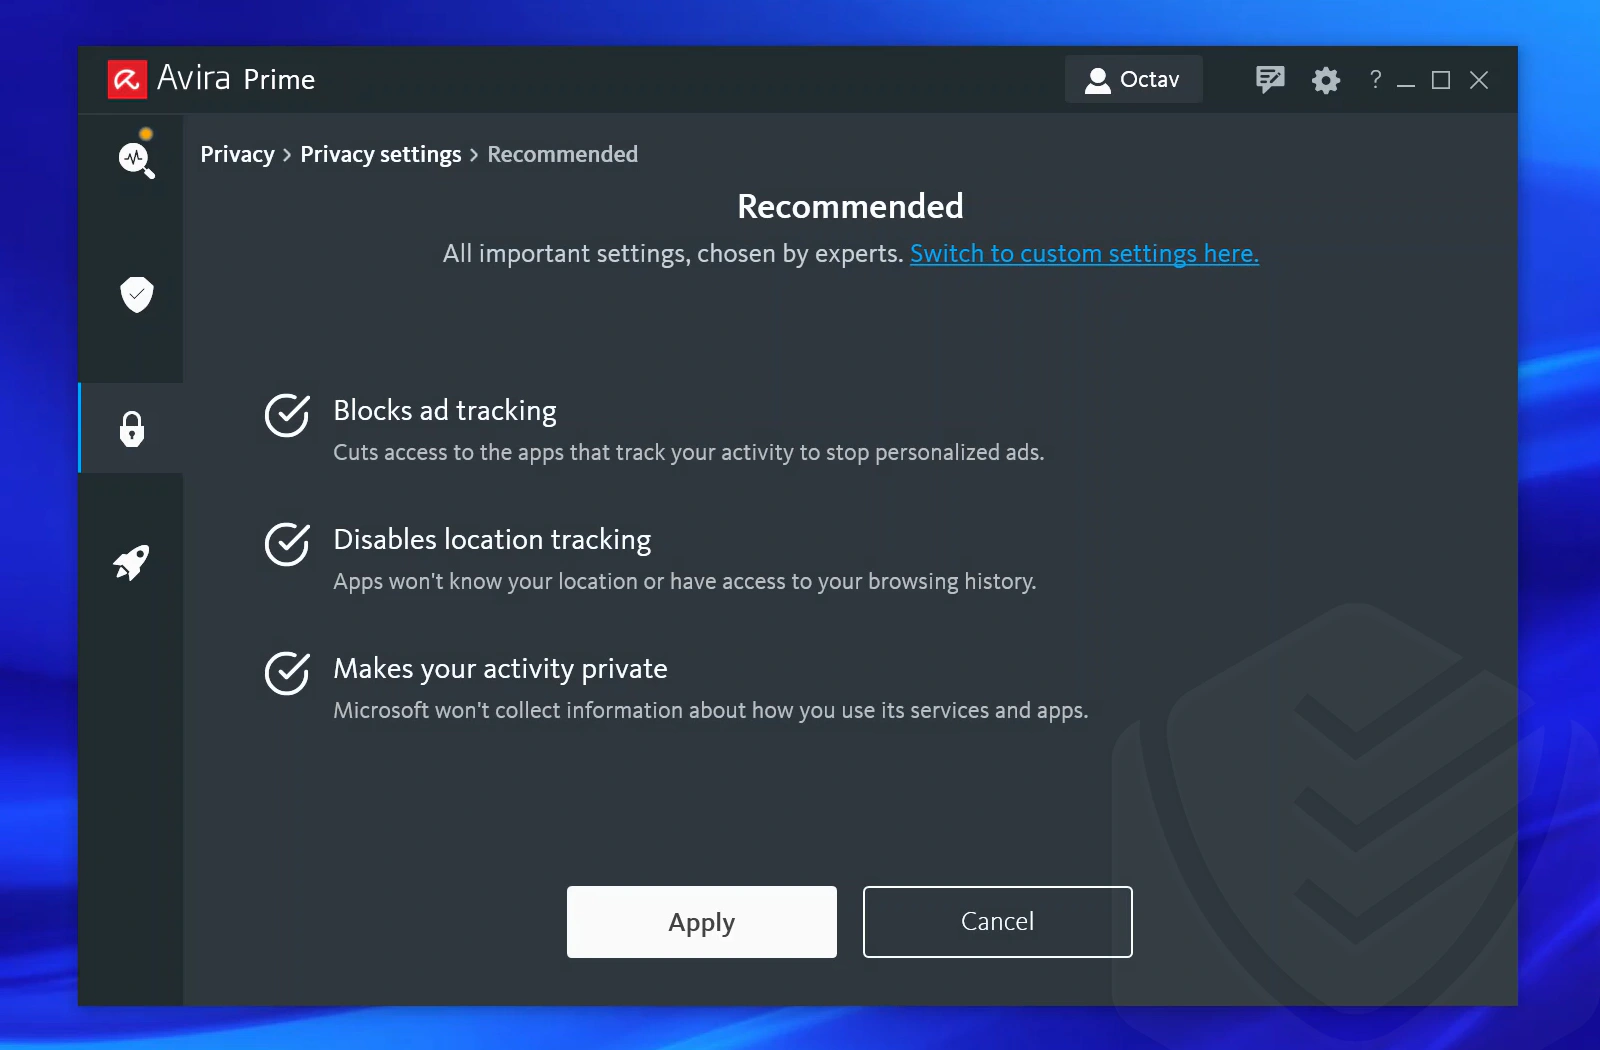 Avira Privacy settings recommendations